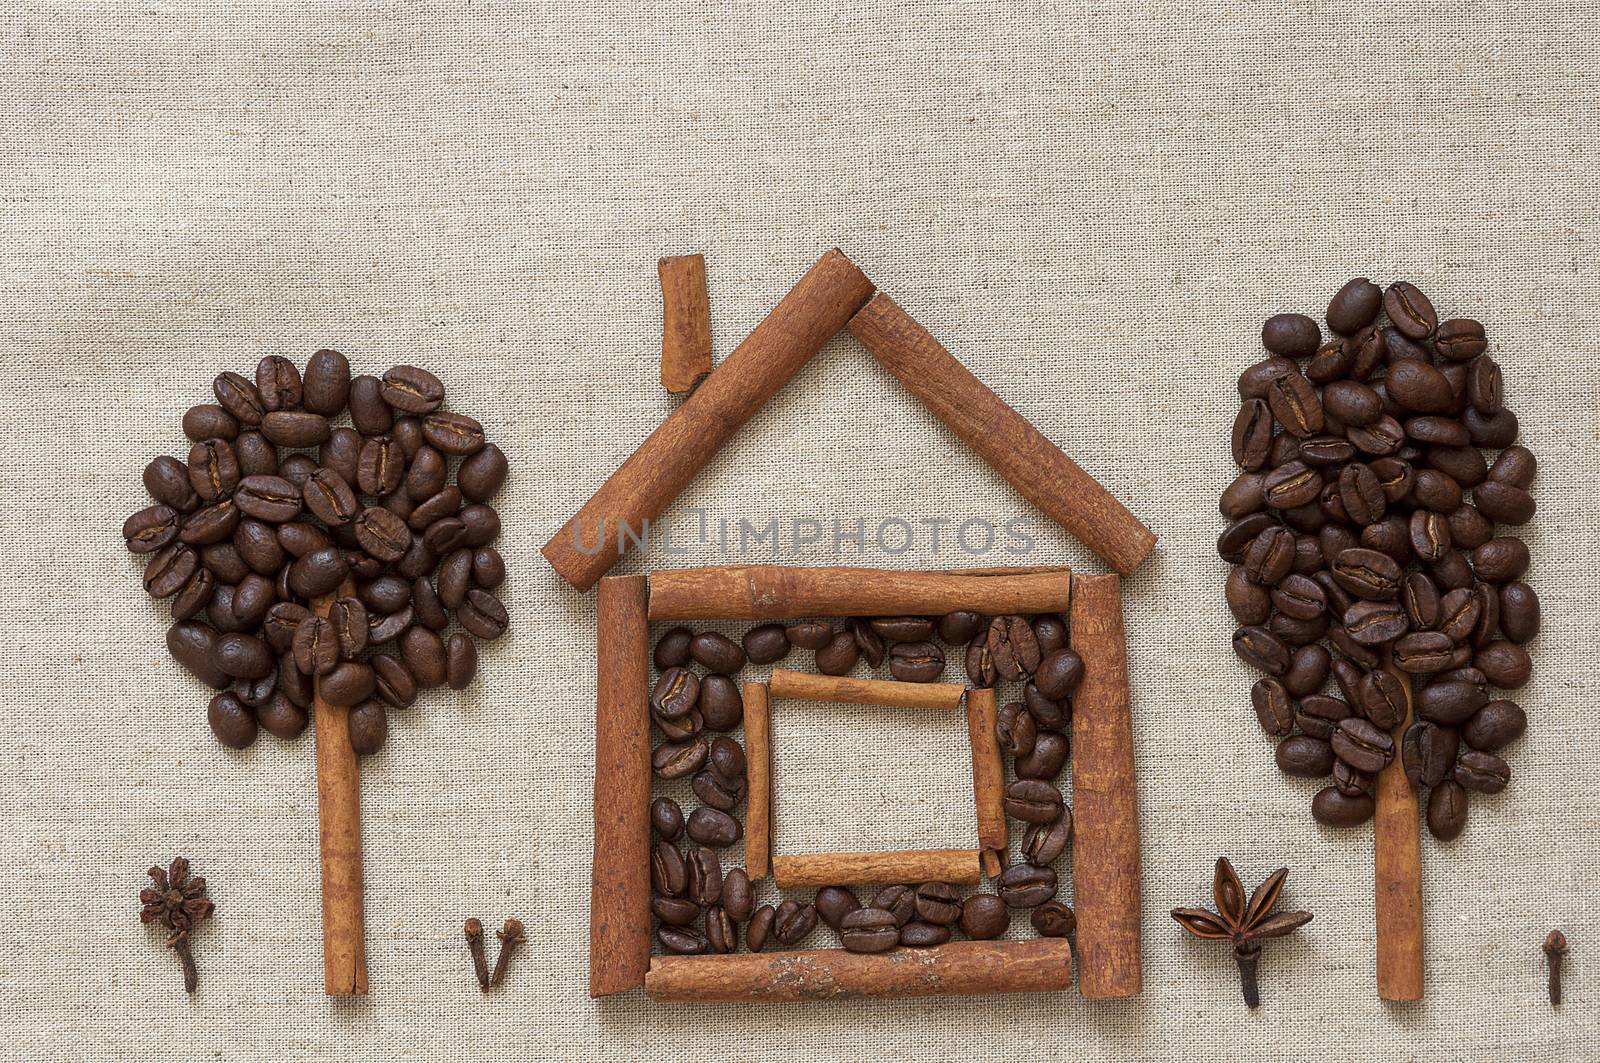 Cinnamon and coffee house by dred